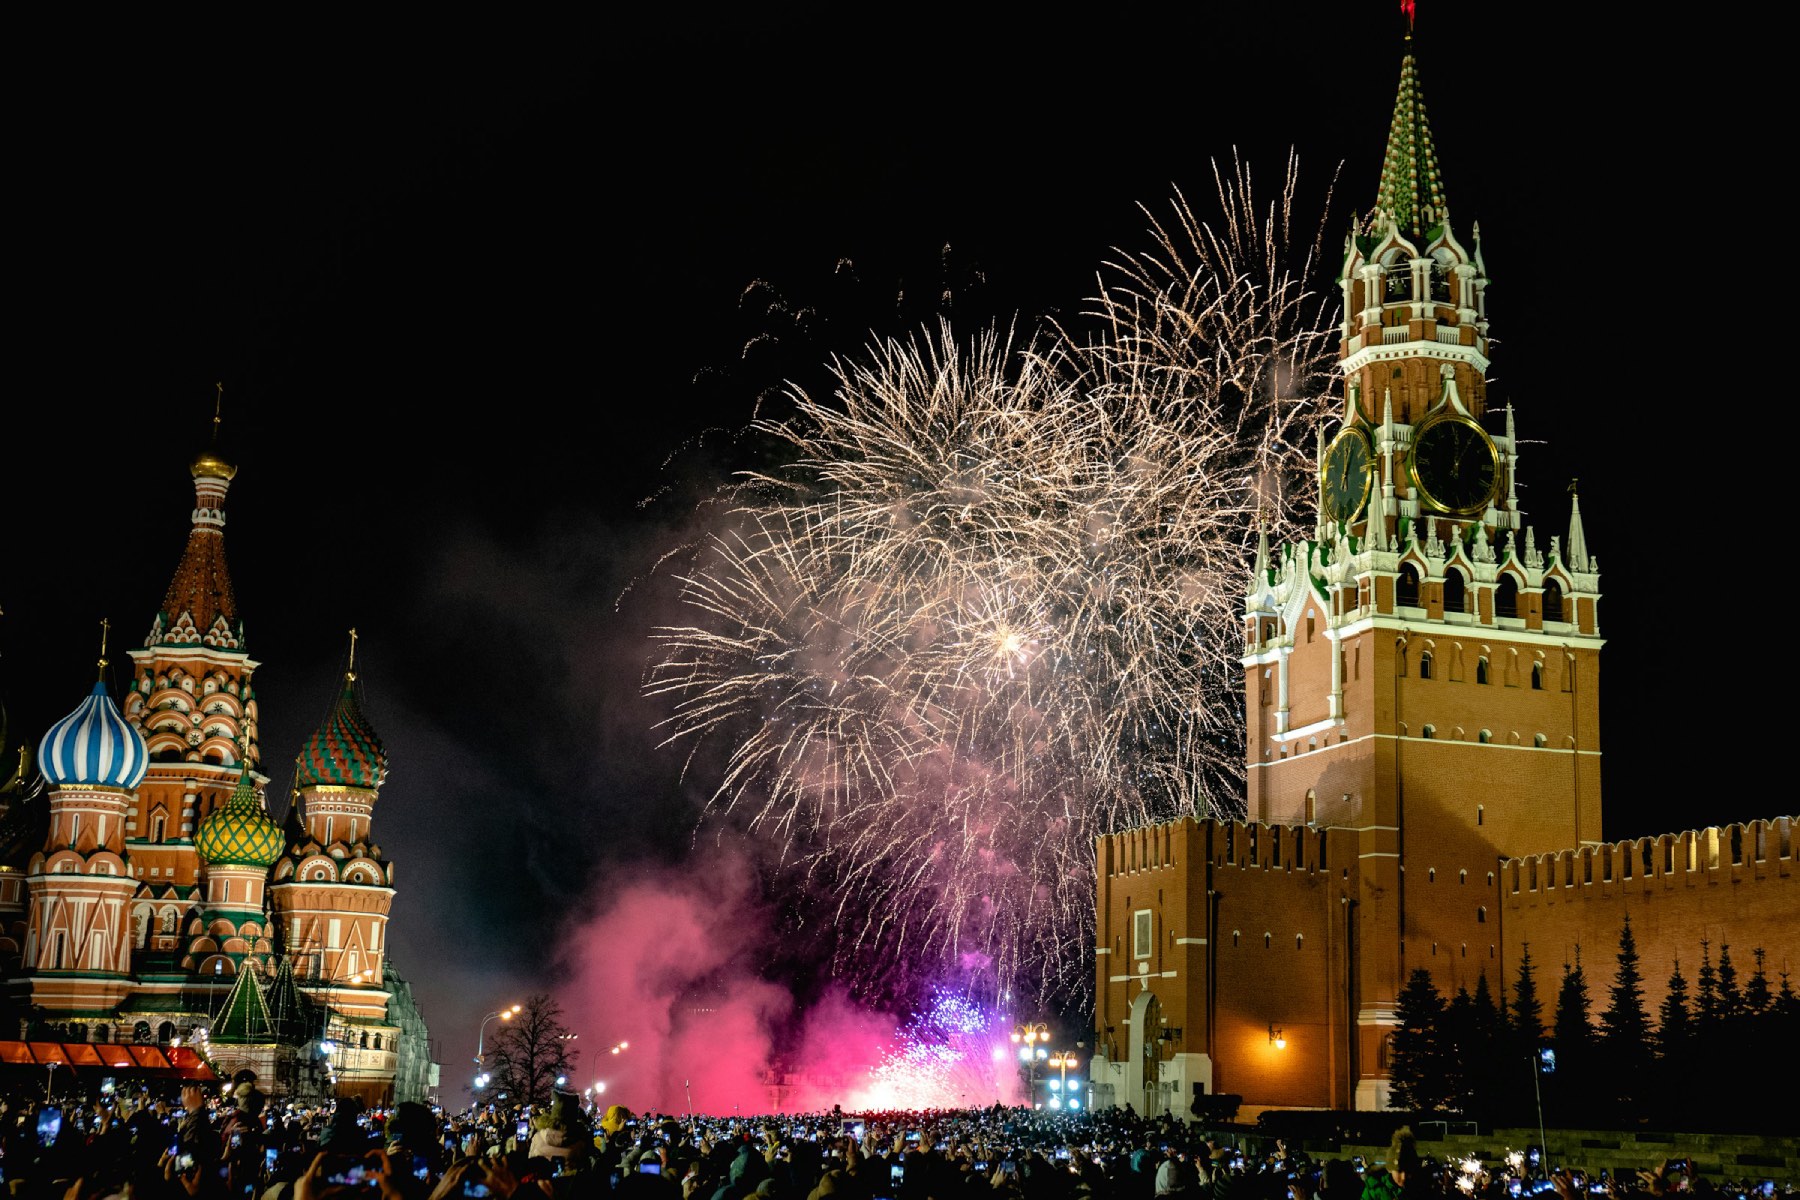 Fireworks near the Kremlin, throngs of people gather at the Red Square